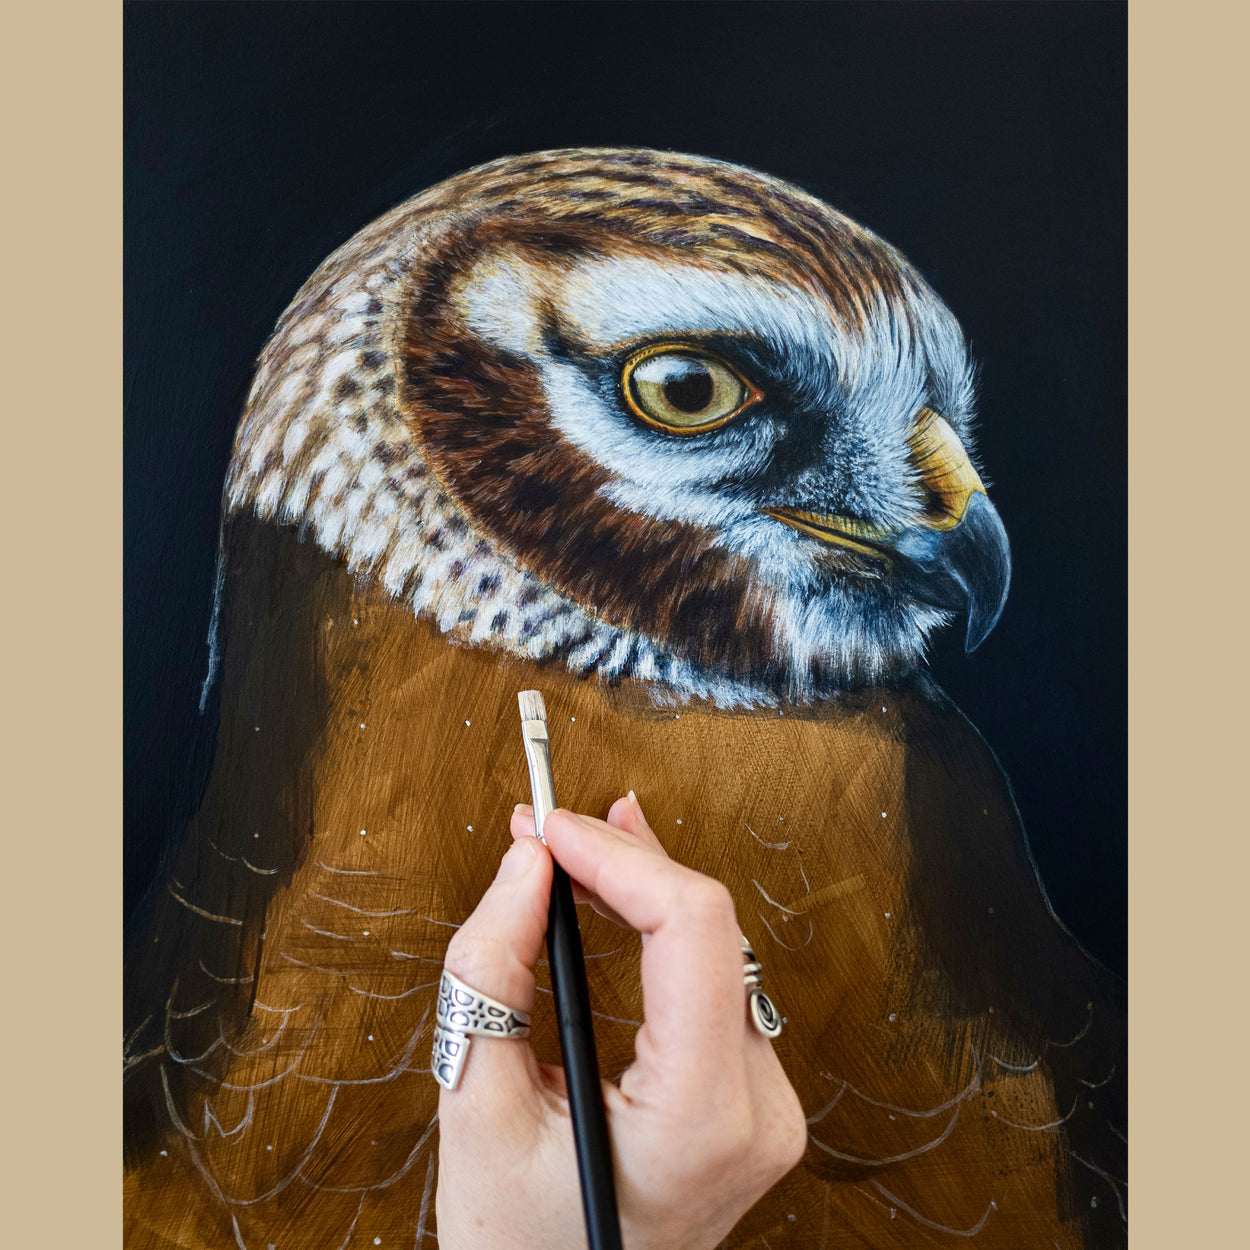 Painting in progress of a hen harrier with a hand holding a paint brush over it